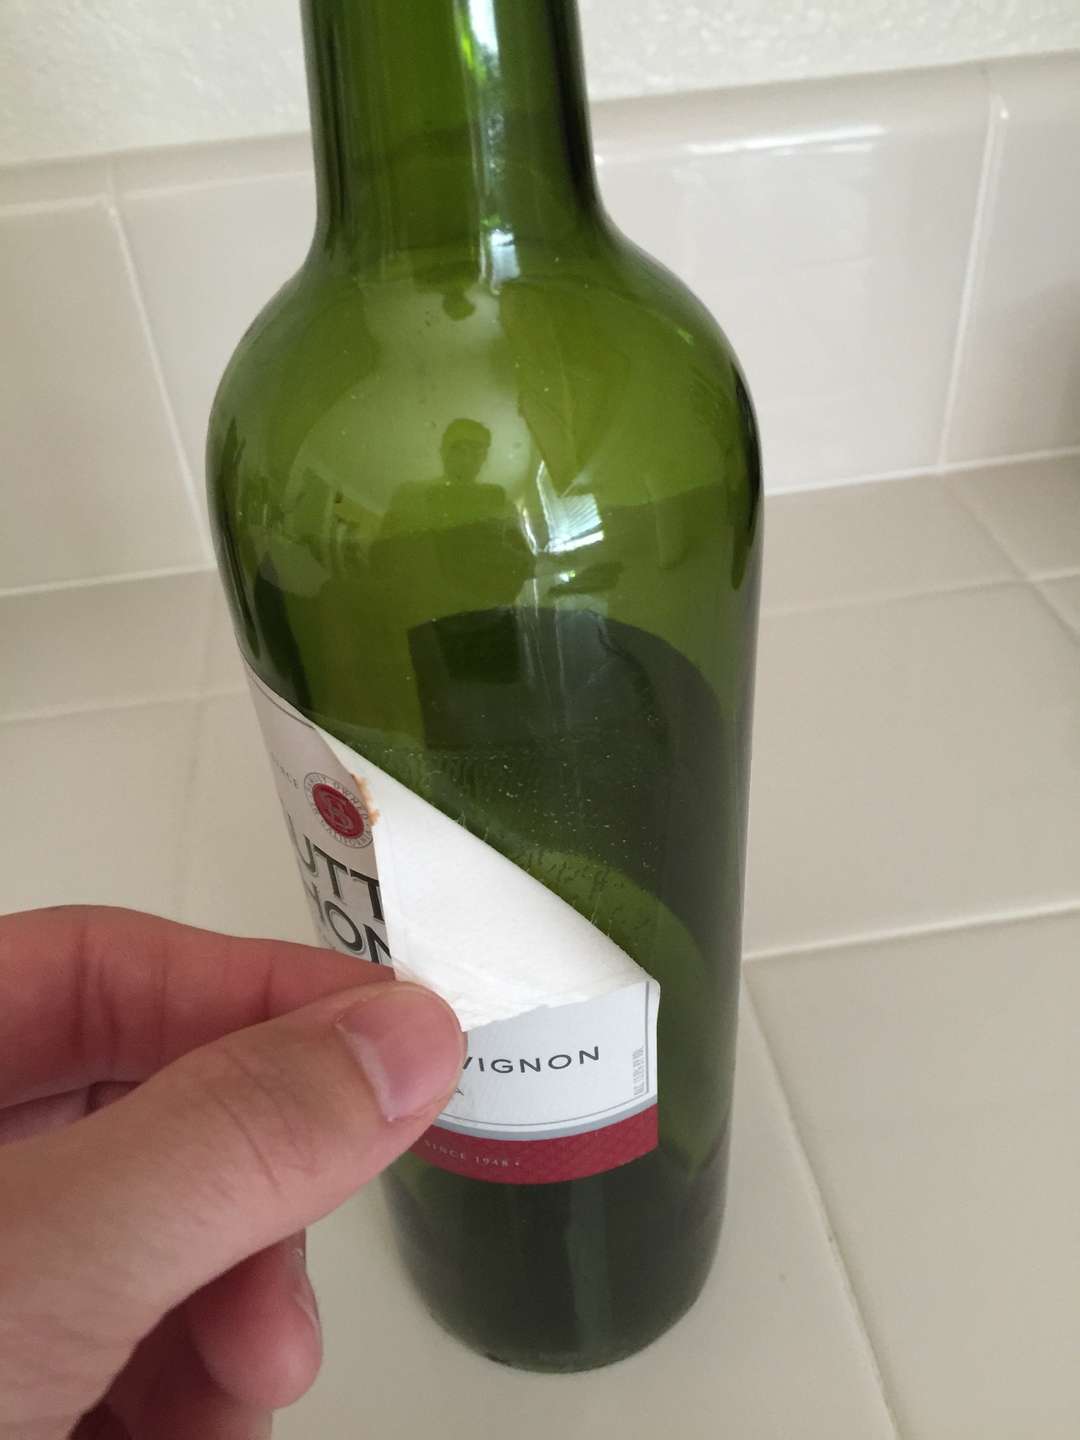 How to remove the label from a wine bottle the easy way ...